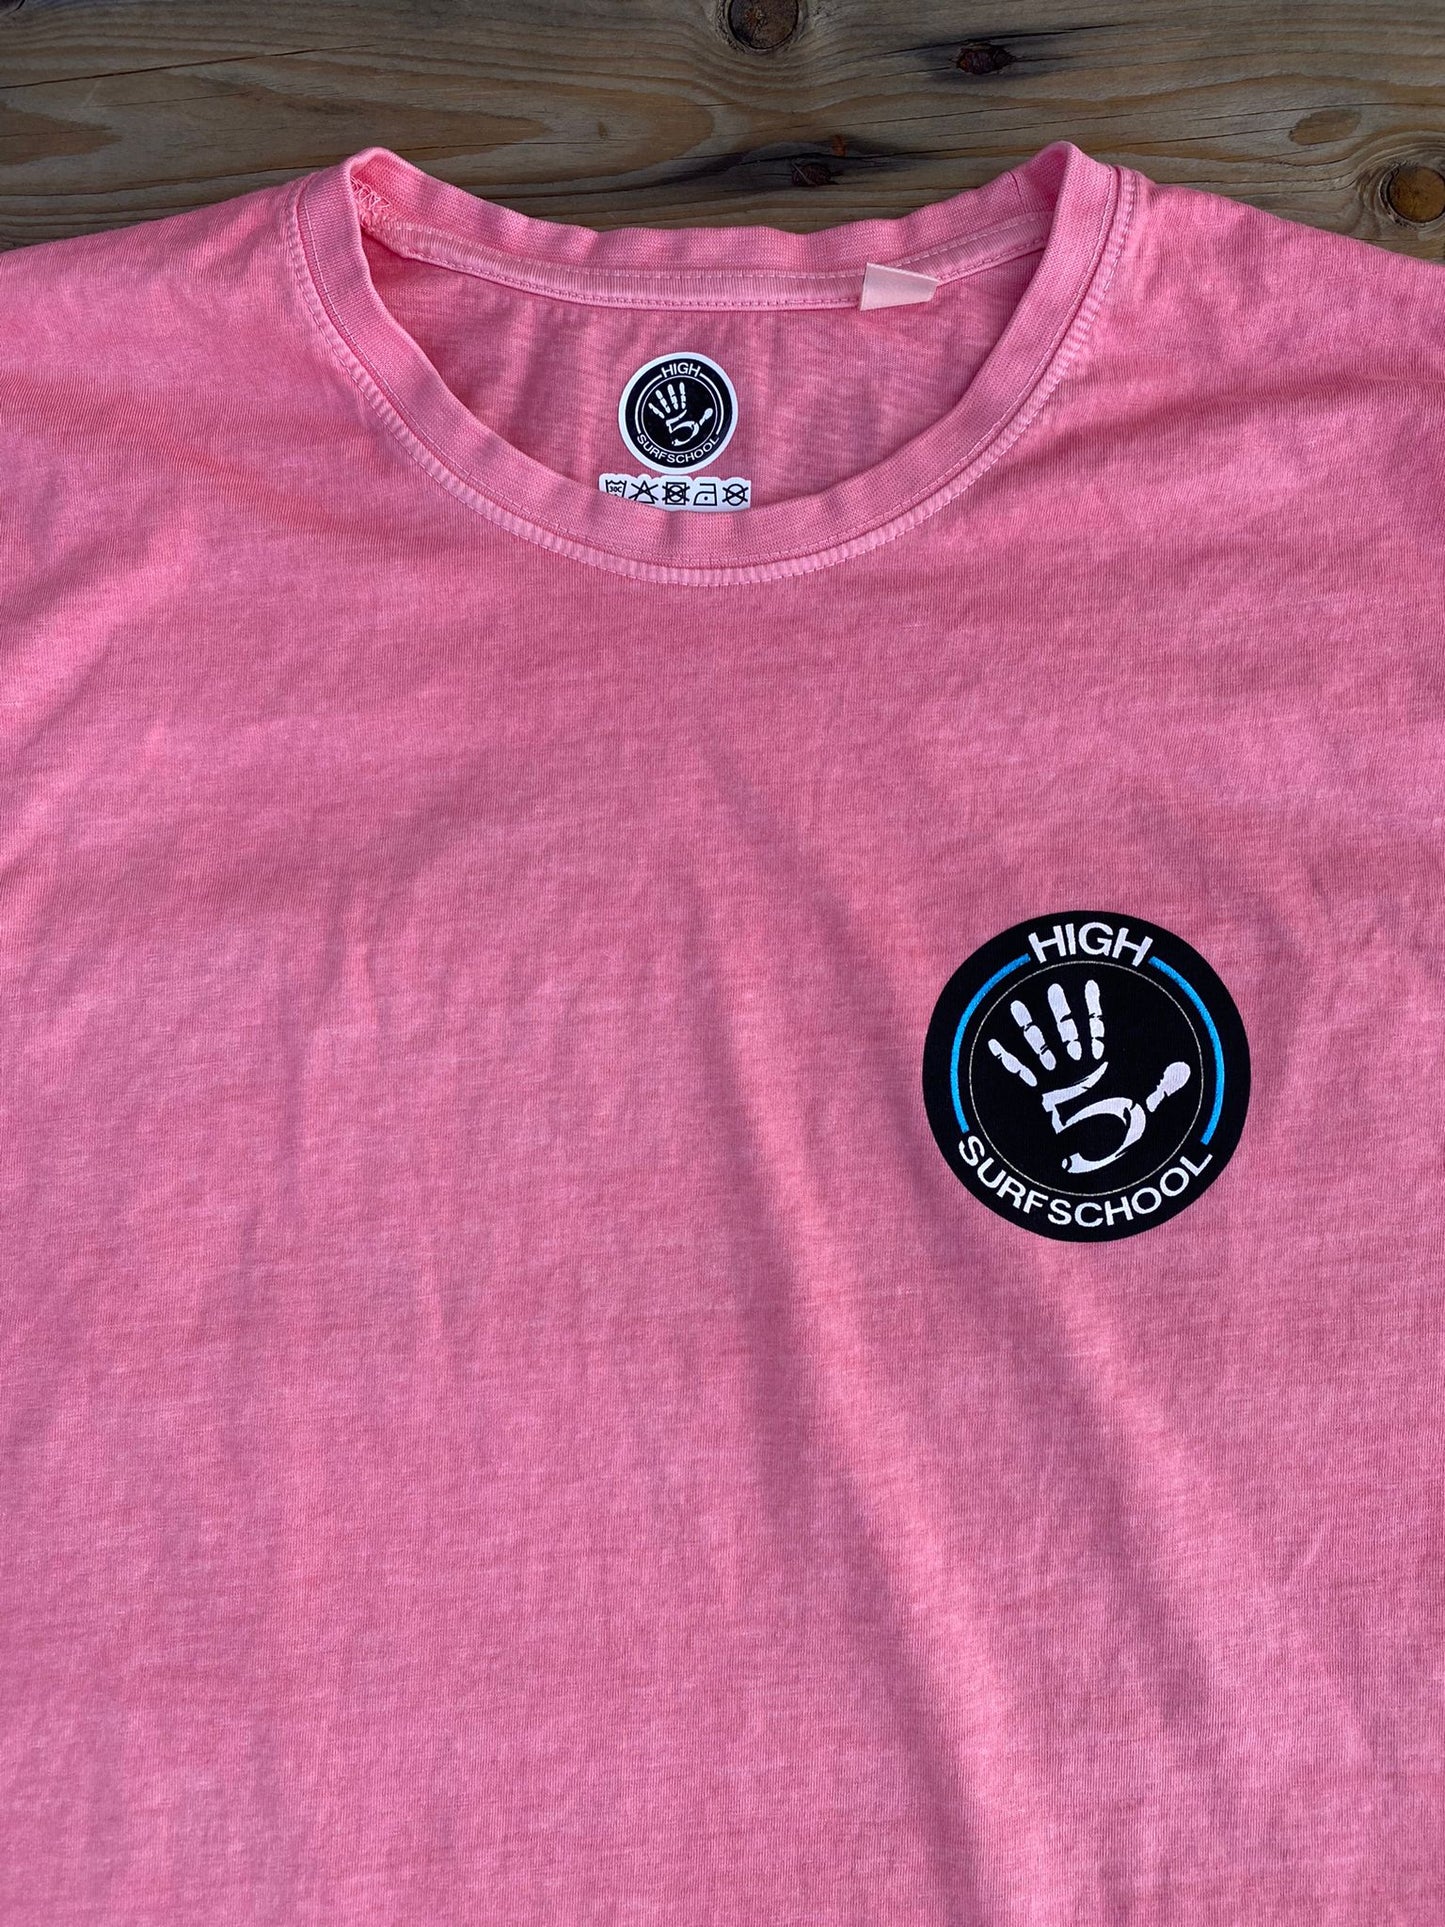 High5 stone washed pink T-shirt LIMITED STOCK!